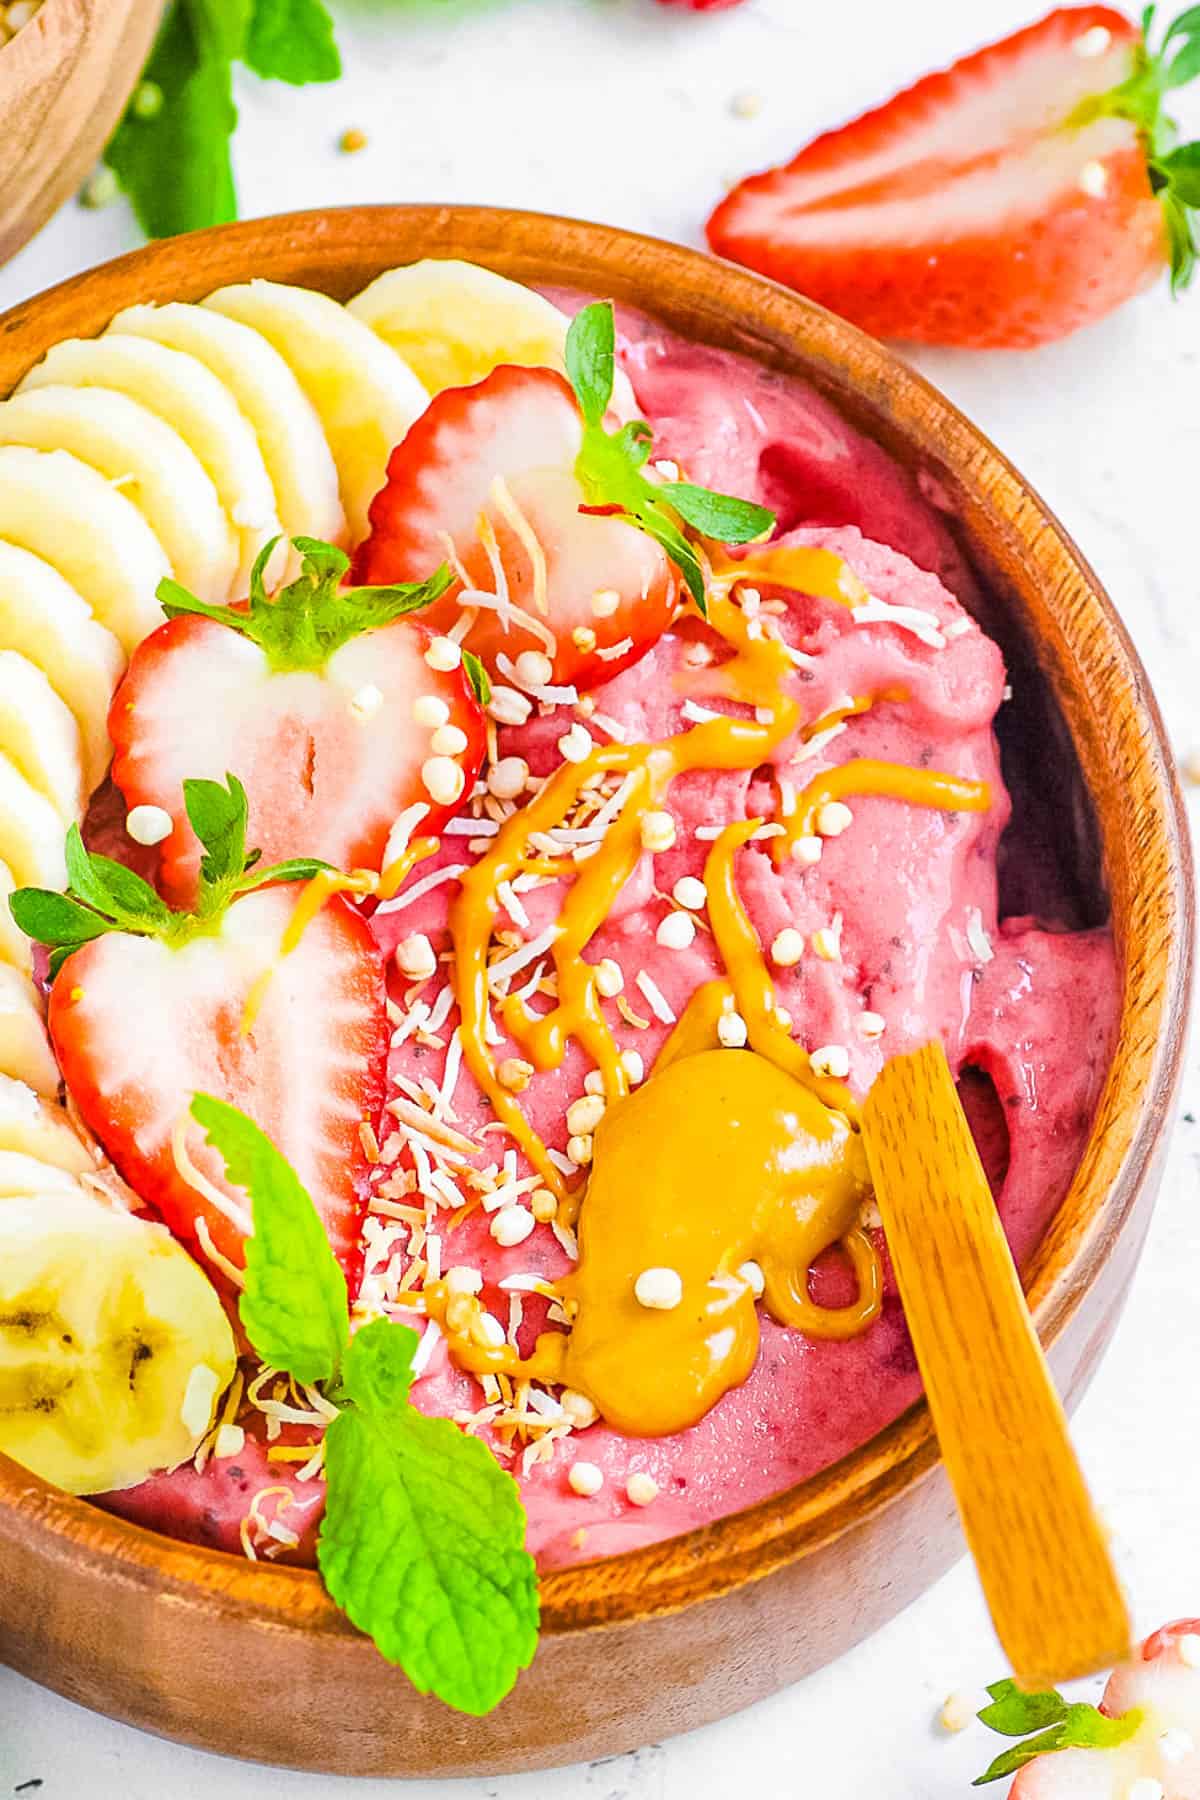 Strawberry smoothie bowl topped with banana slices, strawberries, nut butters and seeds on a white countertop.